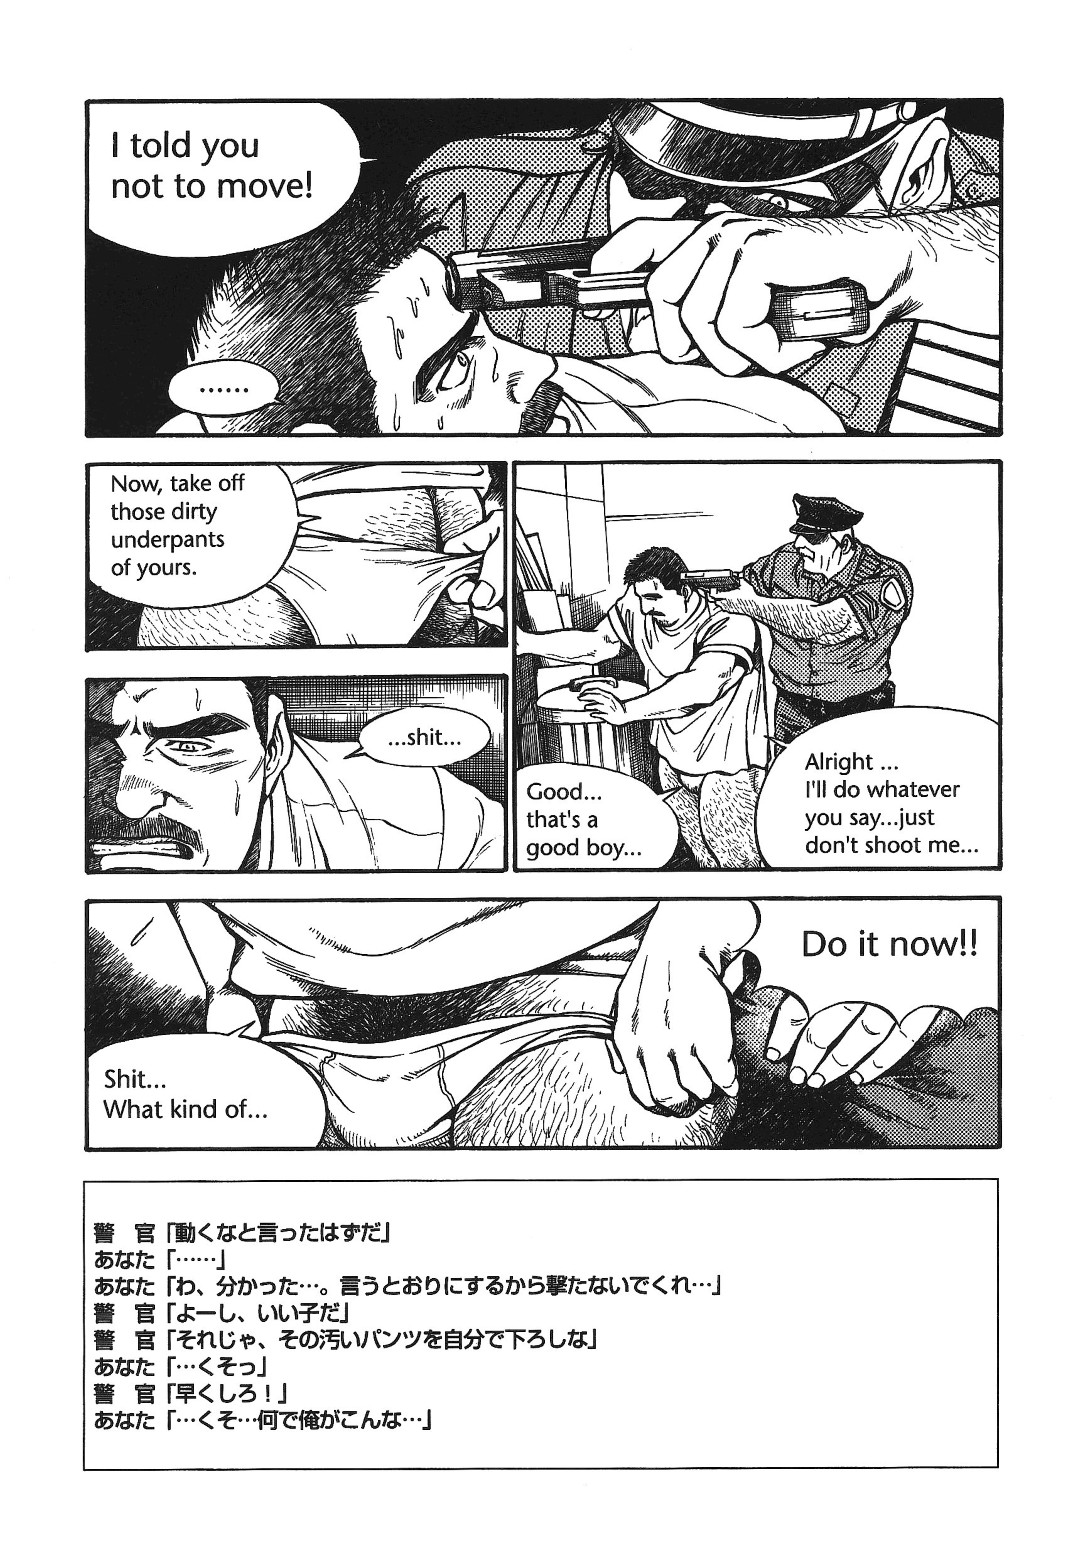 [Go Fujimoto] Put in his place Eng] page 3 full